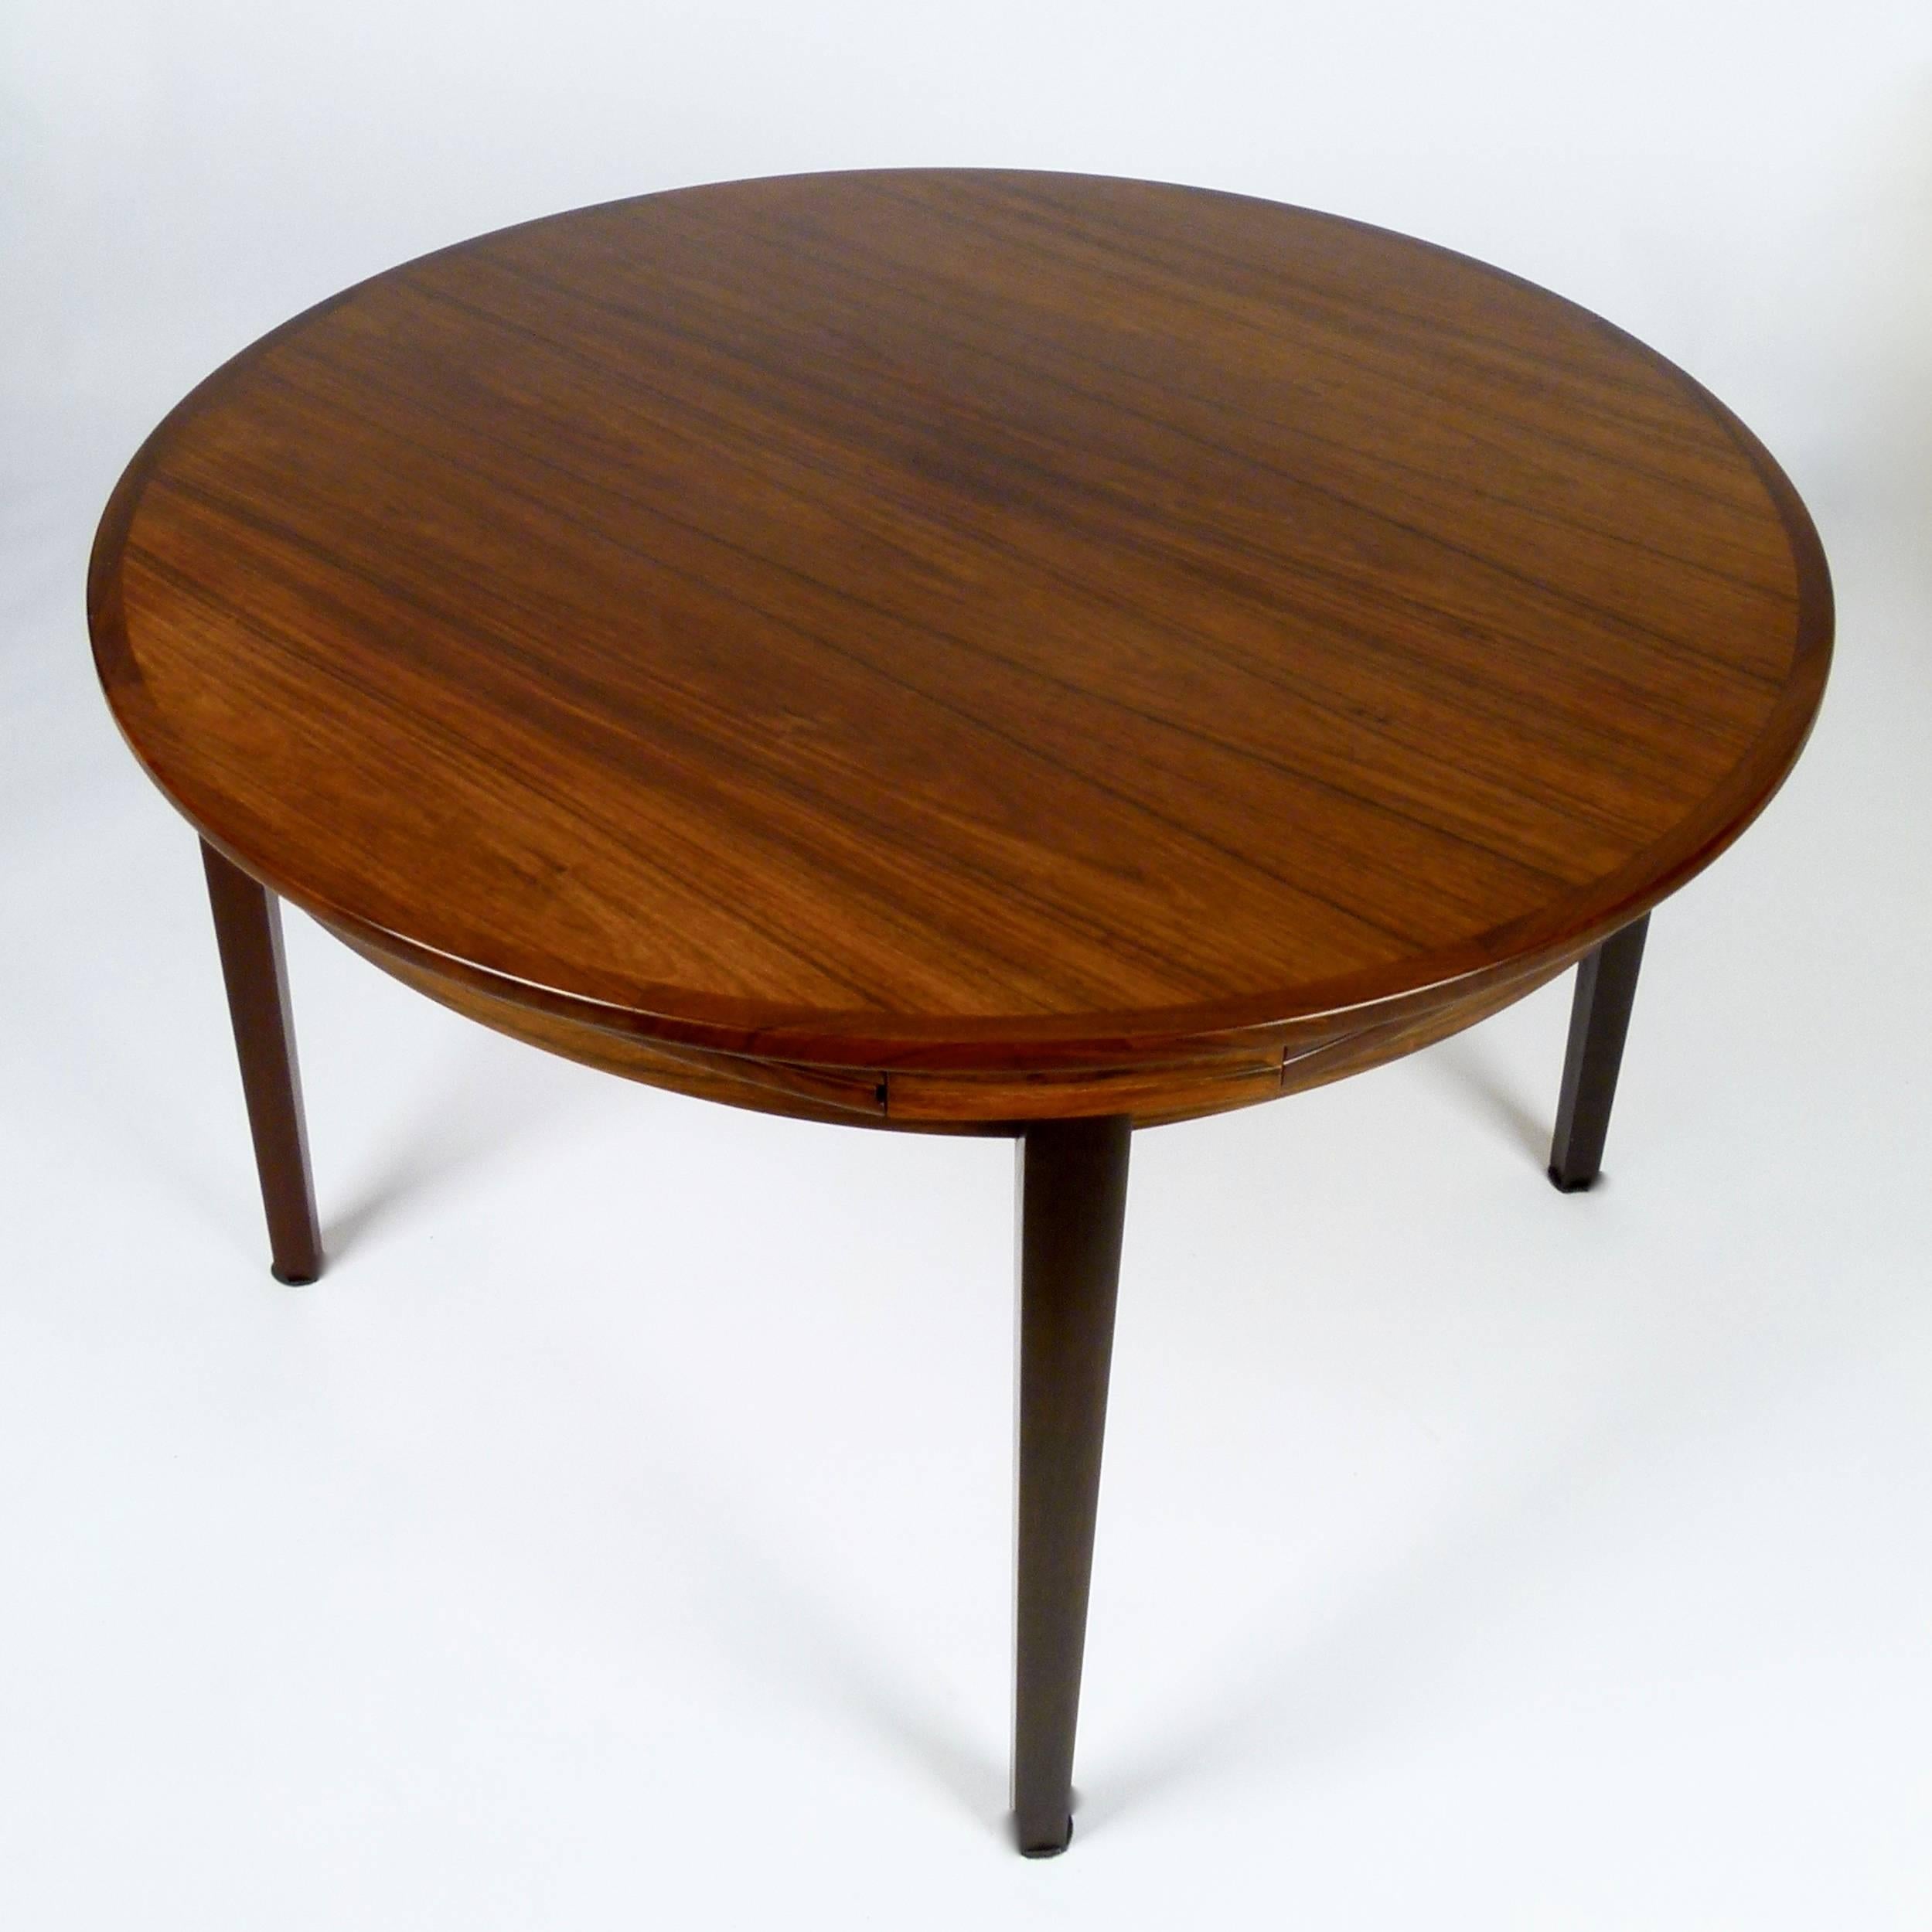 Dining table in rosewood by Dyrlund, Denmark, circa 1970. The 47